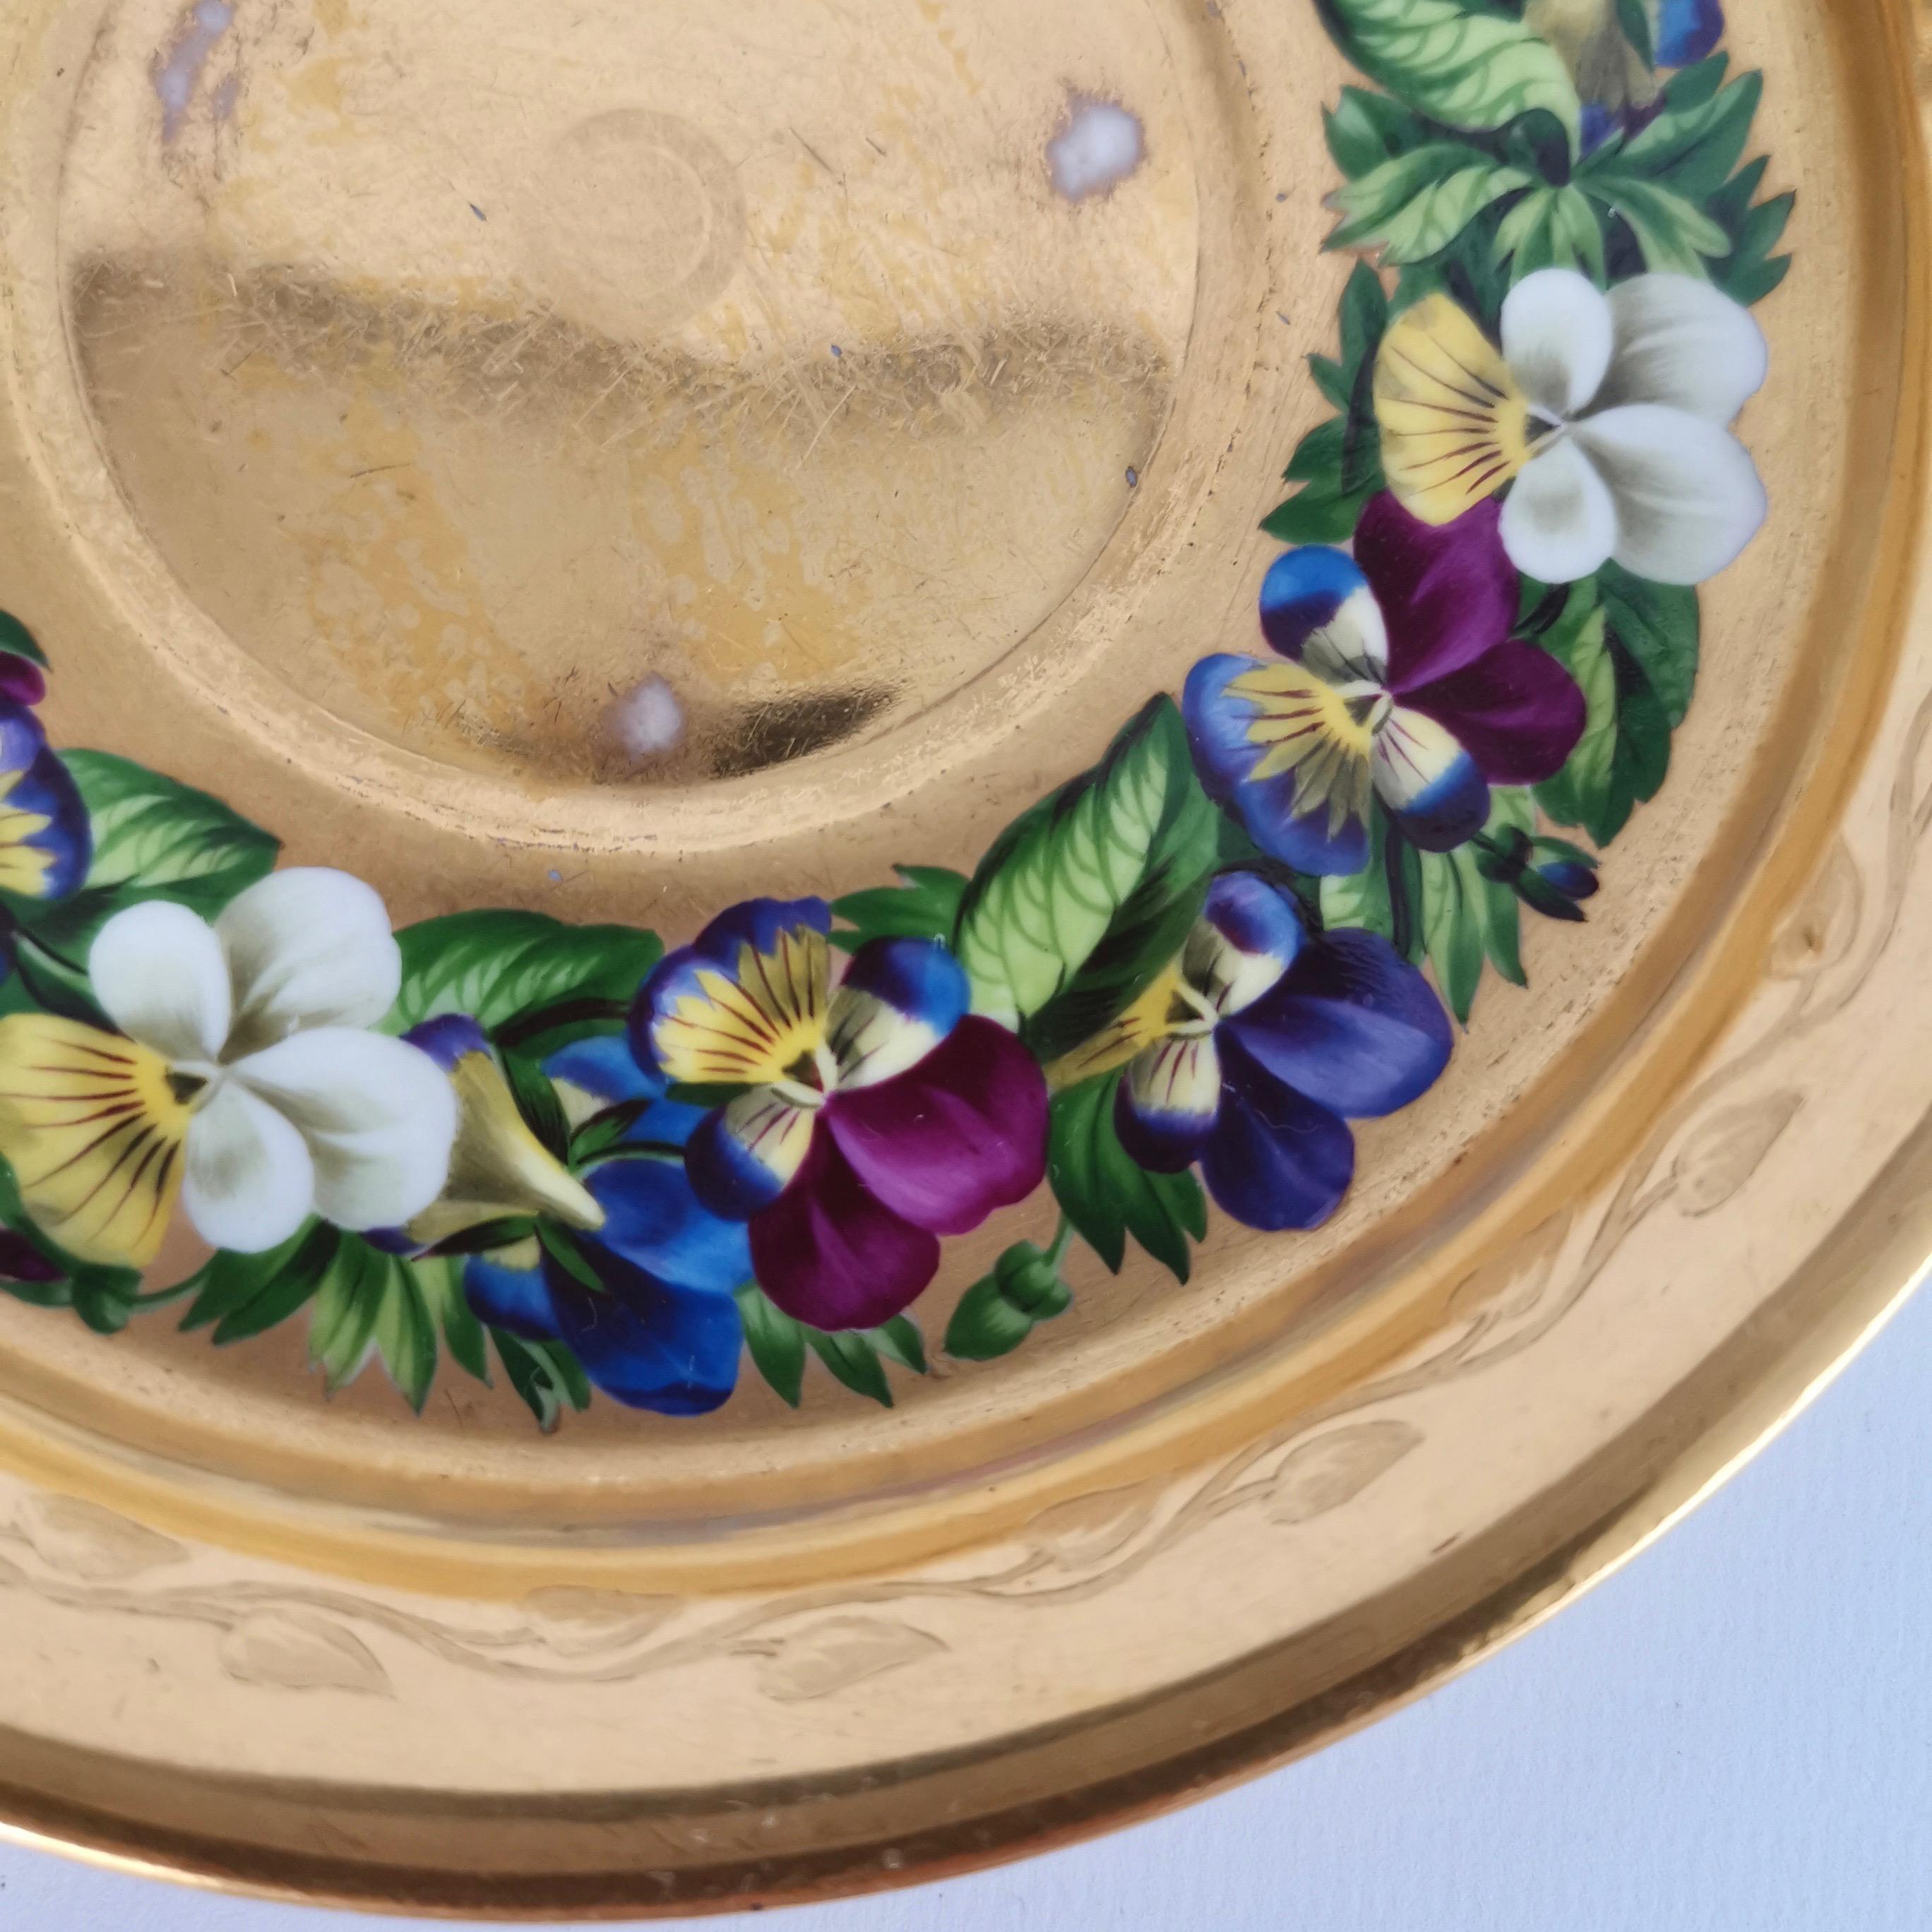 Vienna Porcelain Teacup and Saucer, Gilt and Pansies by Anton Friedl, 1826 5